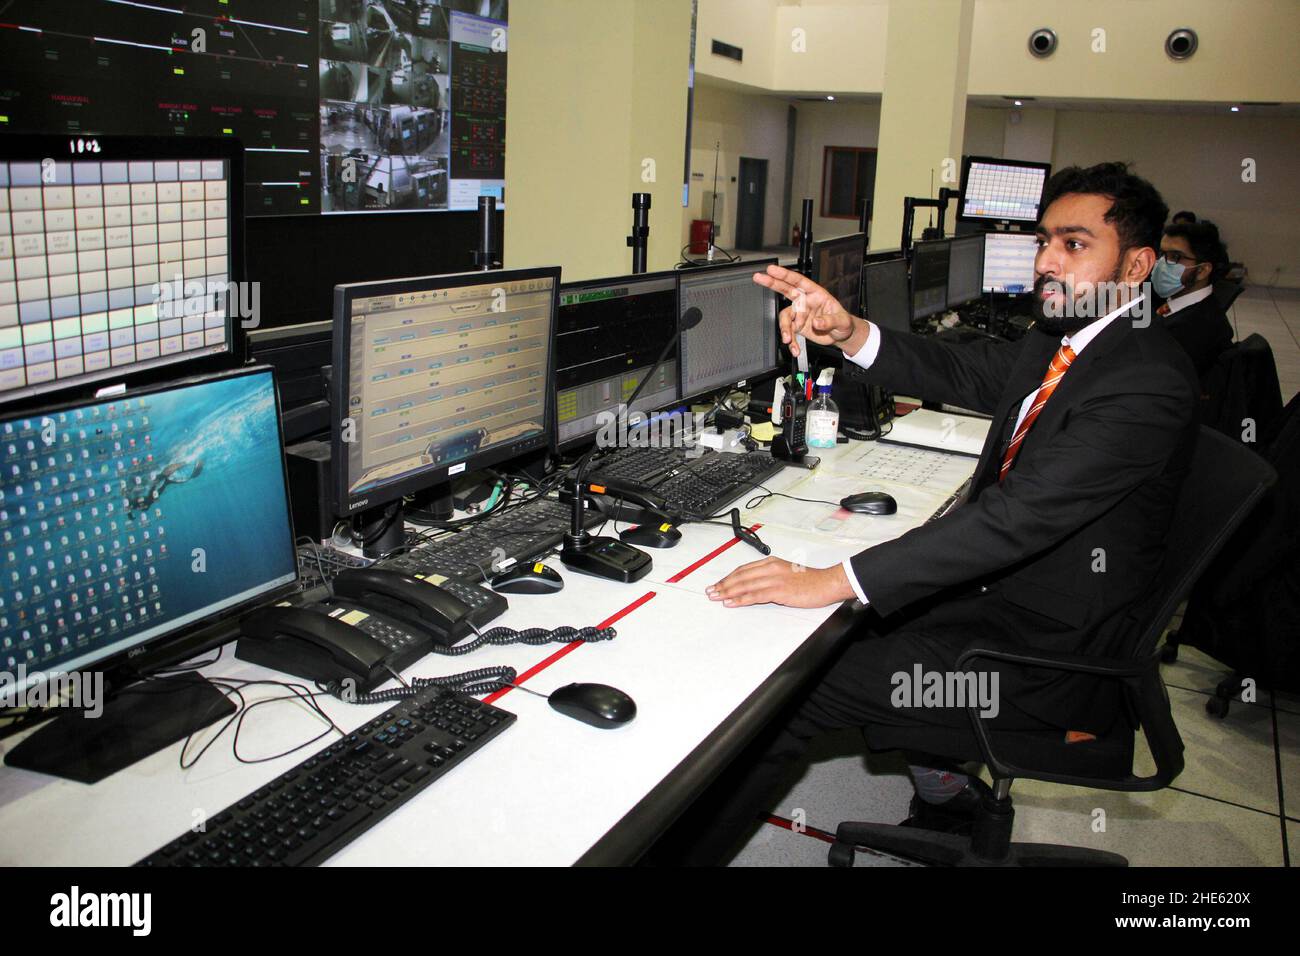 Lahore, Pakistan. 29th Dec, 2021. Mohammad Nauman works at the control room of the terminal station of the Orange Line in Lahore, Pakistan, Dec. 29, 2021. Officially open to traffic on Oct. 25, 2020, the eco-friendly Orange Line metro train is an early project under the China-Pakistan Economic Corridor (CPEC), a flagship project of the China-proposed Belt and Road Initiative. TO GO WITH 'Feature: Lahore Orange Line, epitome of China-Pakistan friendship' Credit: Jamil Ahmed/Xinhua/Alamy Live News Stock Photo